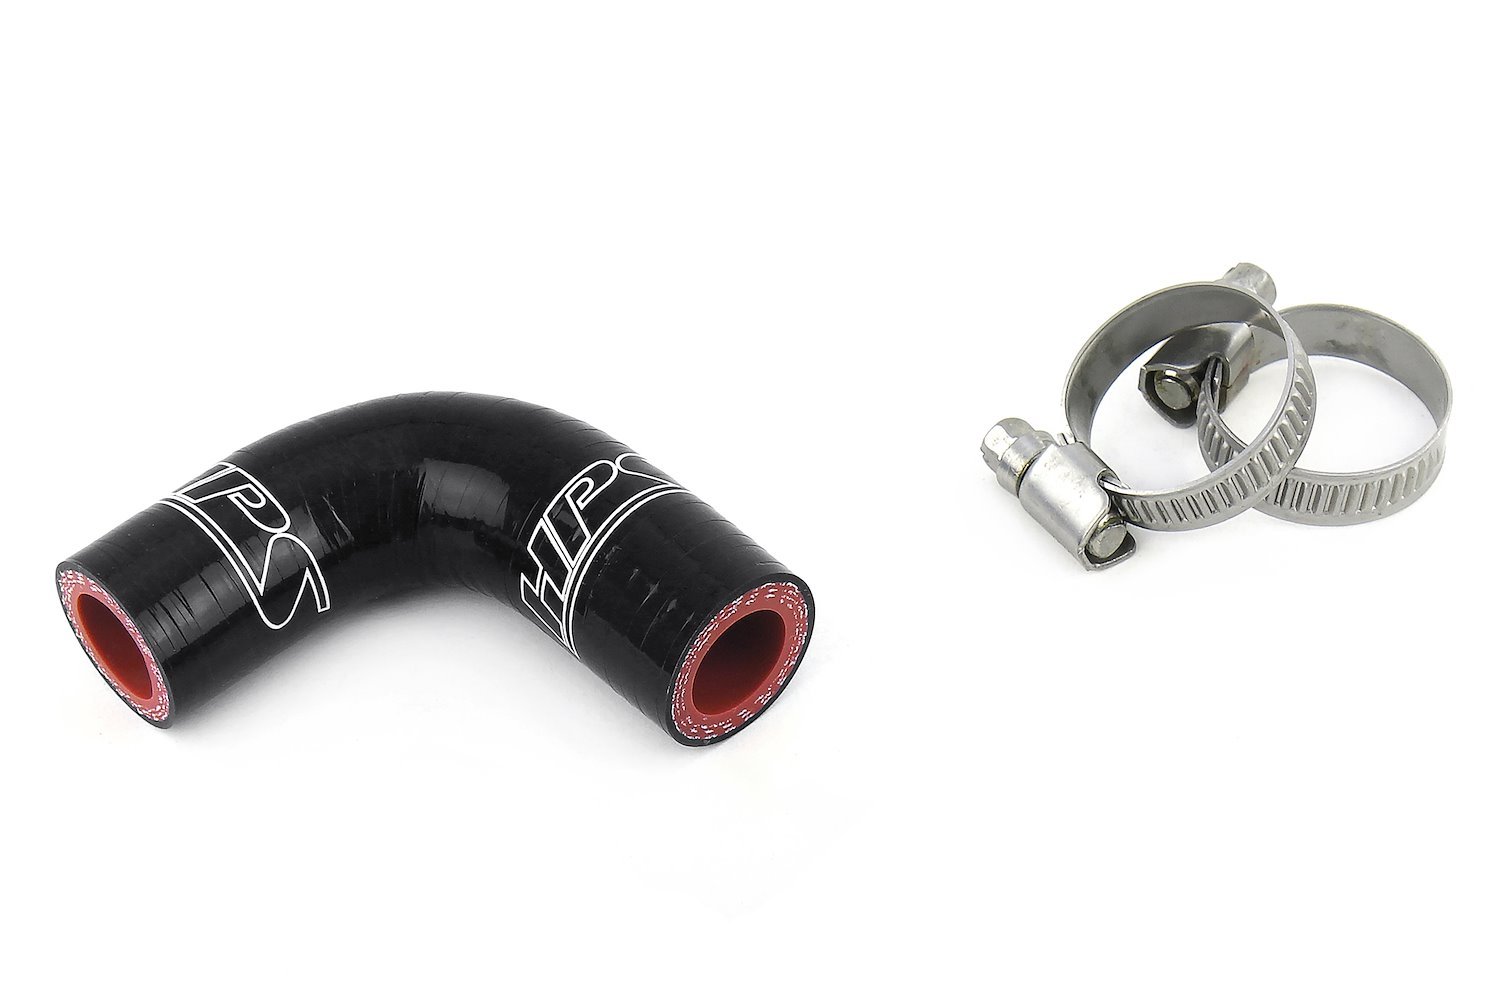 57-1881-BLK Silicone Coolant Hose Kit, 3-Ply Reinforced Silicone, Replaces Rubber Heater & Transmission Coolant Hoses